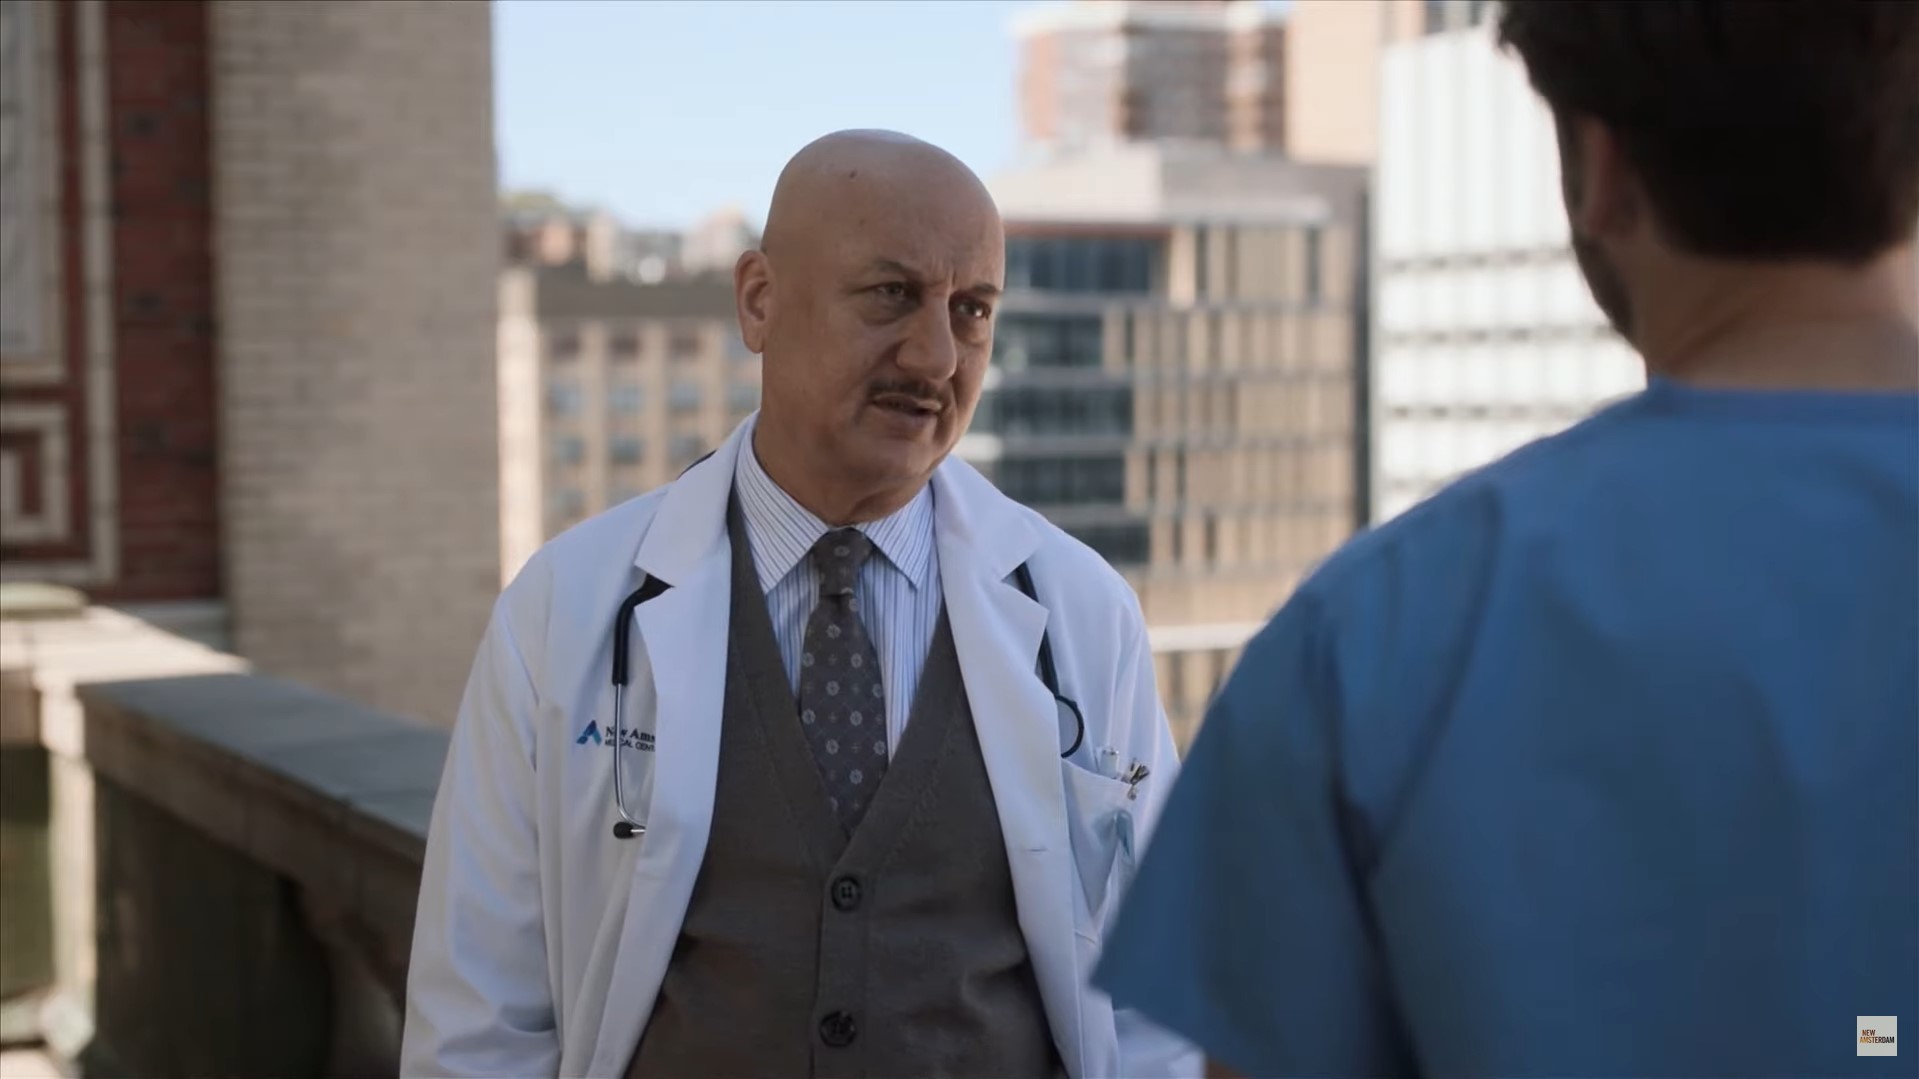 Why Did Anupam Kher’s Dr. Kapoor Leave New Amsterdam?